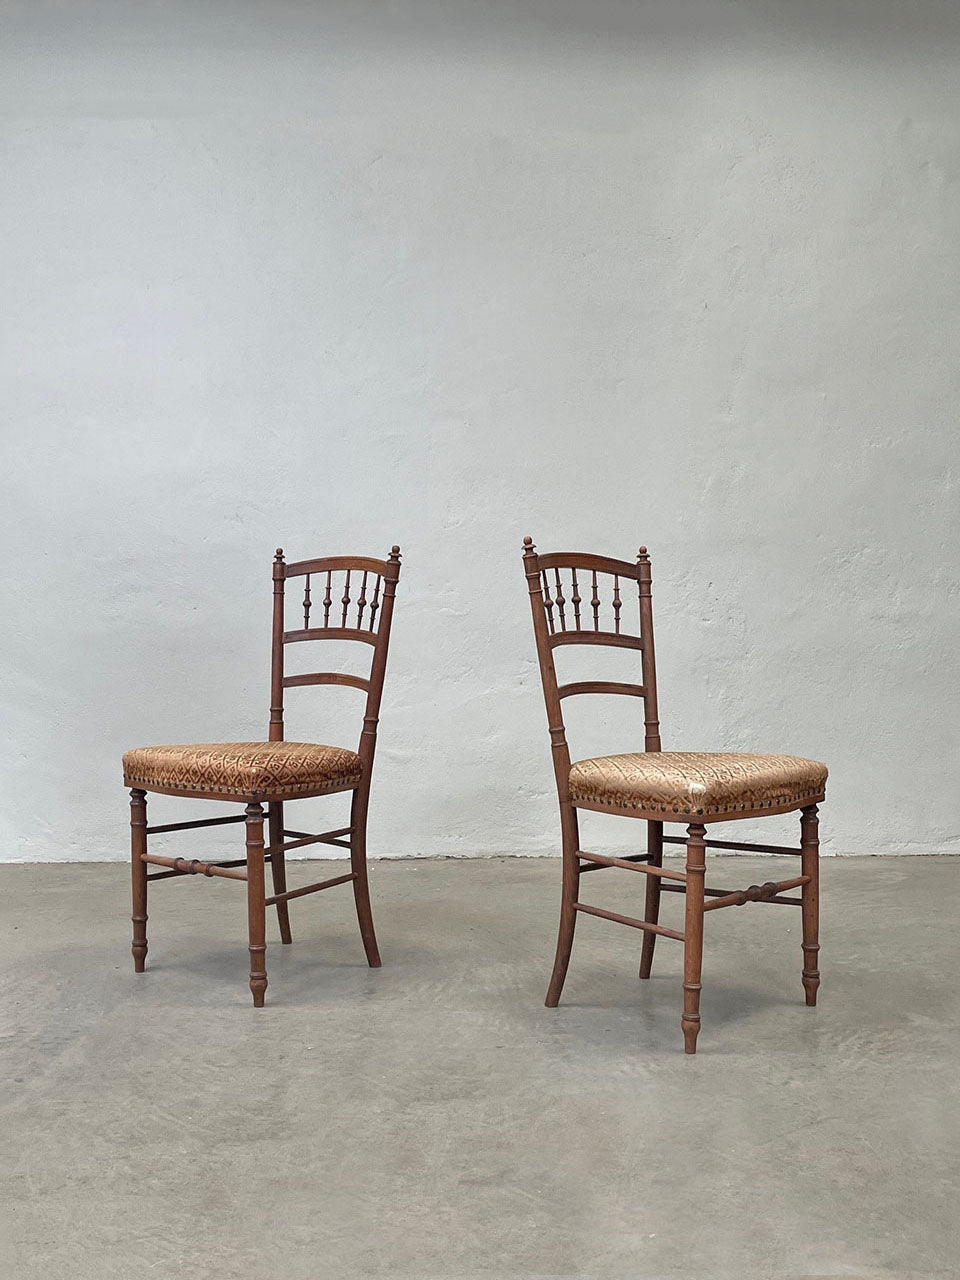 Pair of upholstered chairs (pair, 'as is') (Reserved)